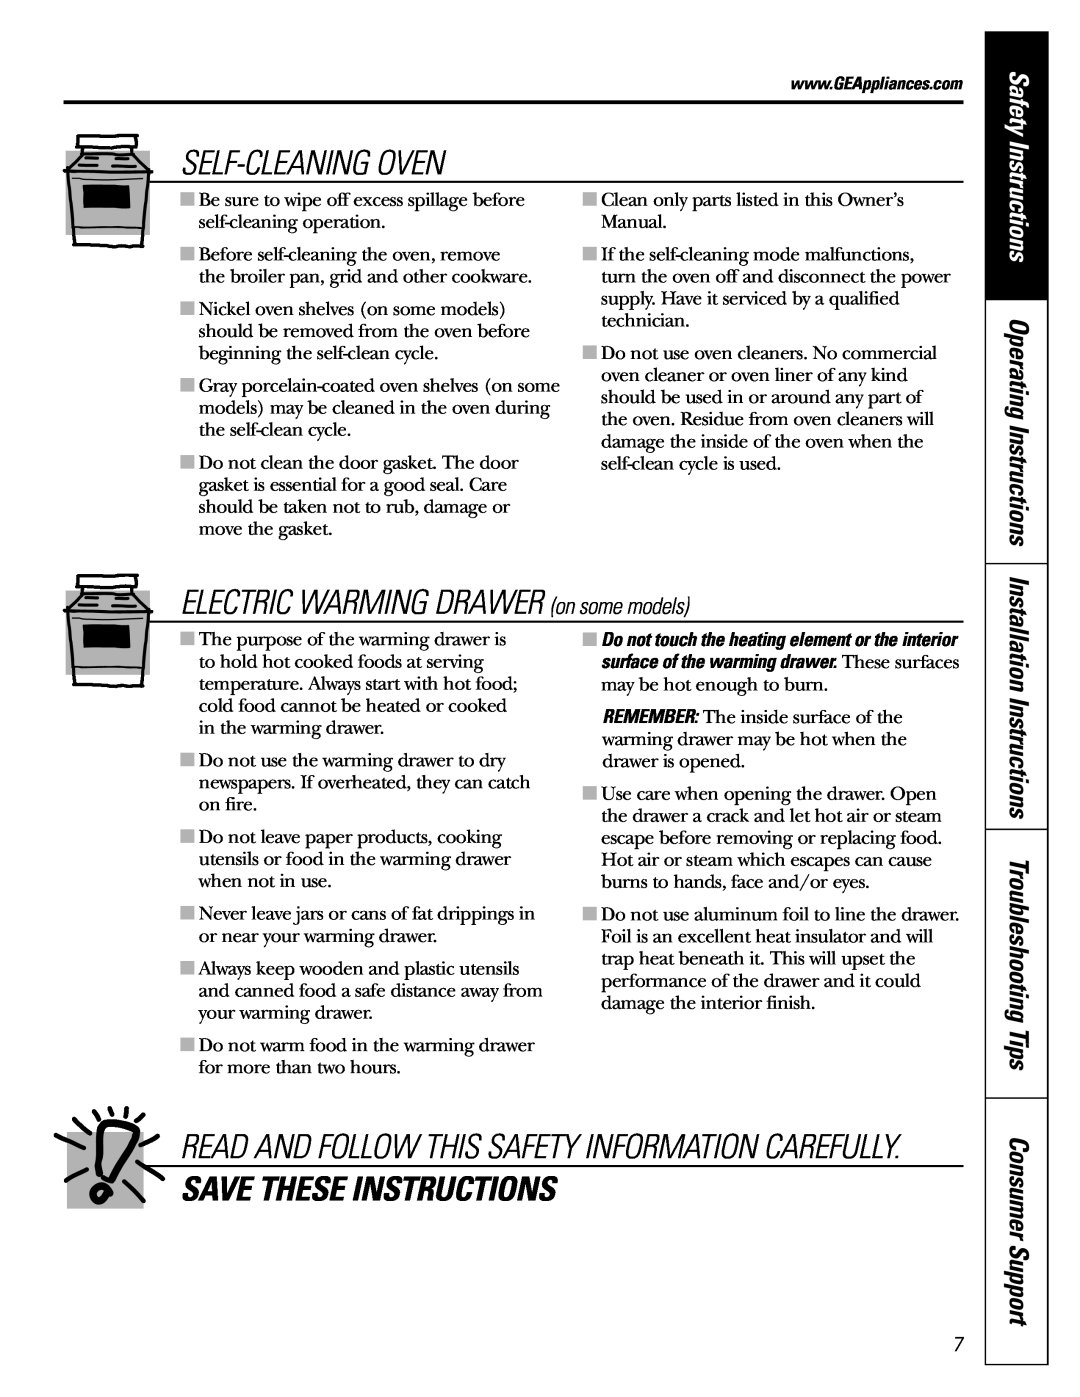 GE JGBP36 Self-Cleaning Oven, ELECTRIC WARMING DRAWER on some models, Save These Instructions, Safety, Consumer Support 